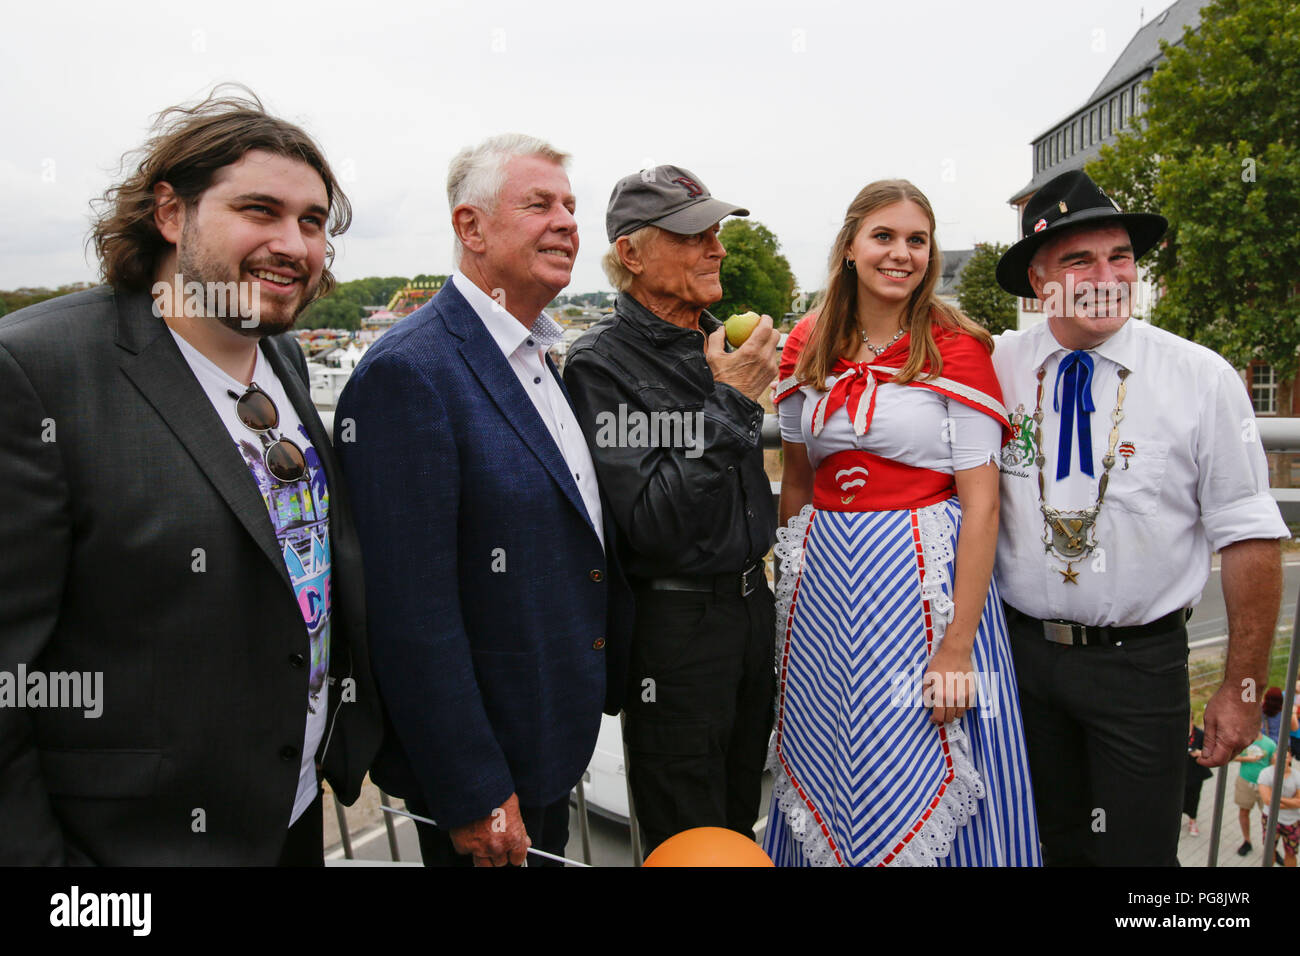 Worms, Germany. 24th August 2018. Actor Peter Englert, who initiated the renaming of the bridge to Terence-Hill-Bridge, the Lord Mayor of Worms Michael Kissel, Terence Hill, the Backfishbide Beatrice Duda and the mayor of the fishermen’s lea Markus Trapp pose from left to right for the cameras. Italian actor Terence Hill visited the German city of Worms, to present his new movie (My Name is somebody). Terence Hill added the stop in Worms to his movie promotion tour in Germany, to visit a pedestrian bridge, that is unofficially named Terence-Hill-Bridge (officially Karl-Kubel-Bridge). Stock Photo